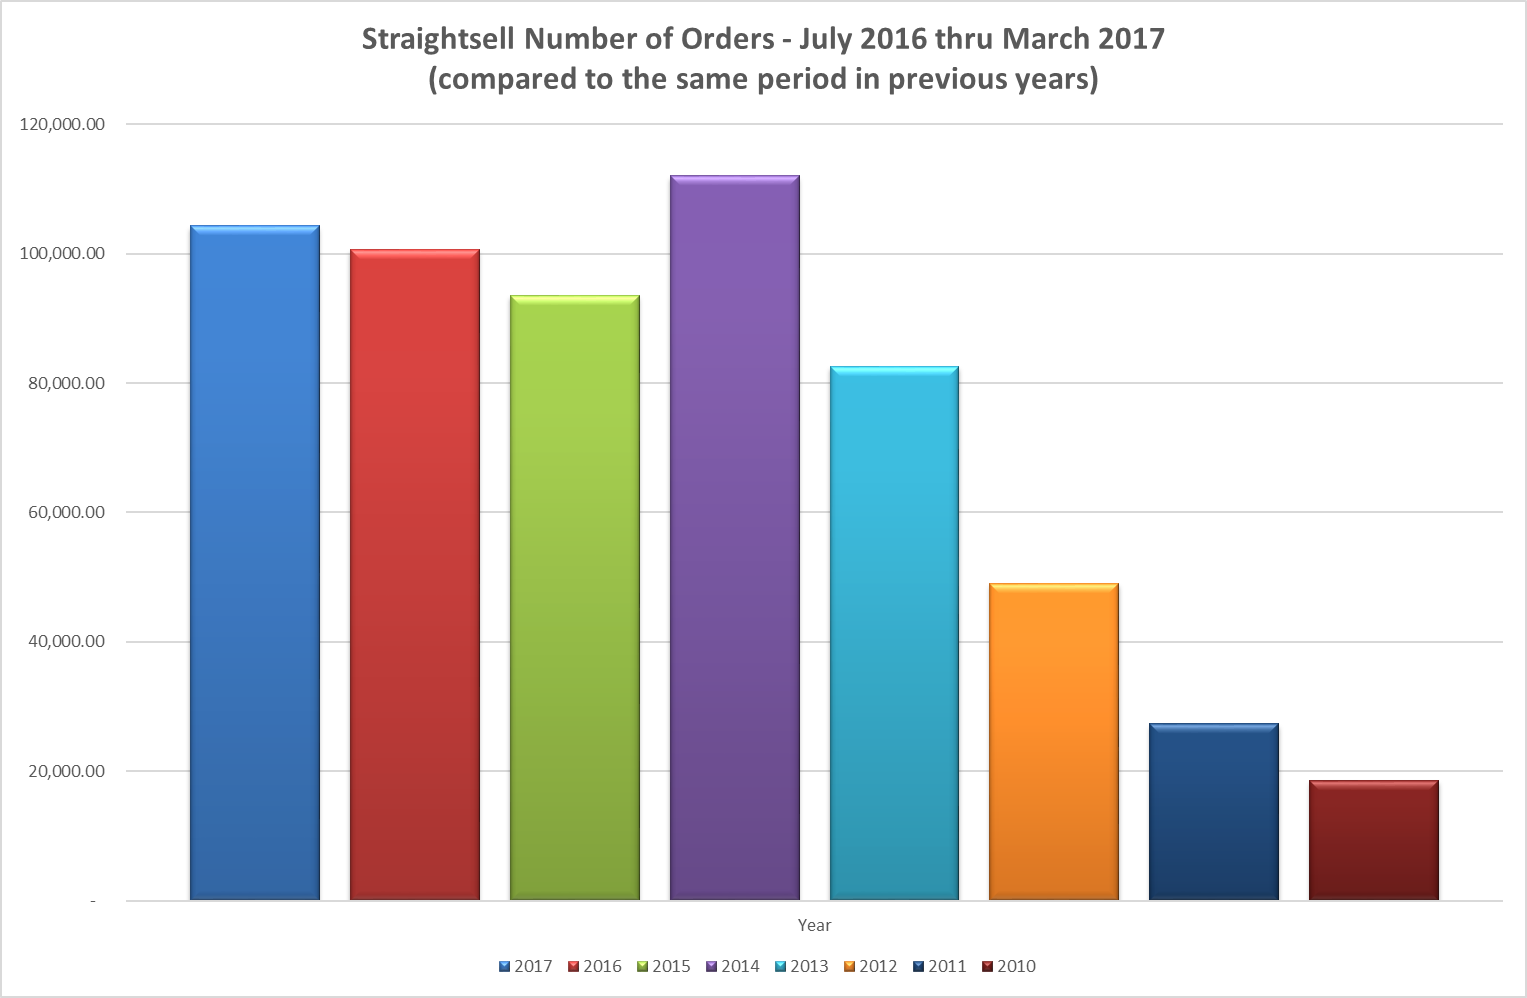 Straightsell Number of Orders - July 2016 thru March 2017